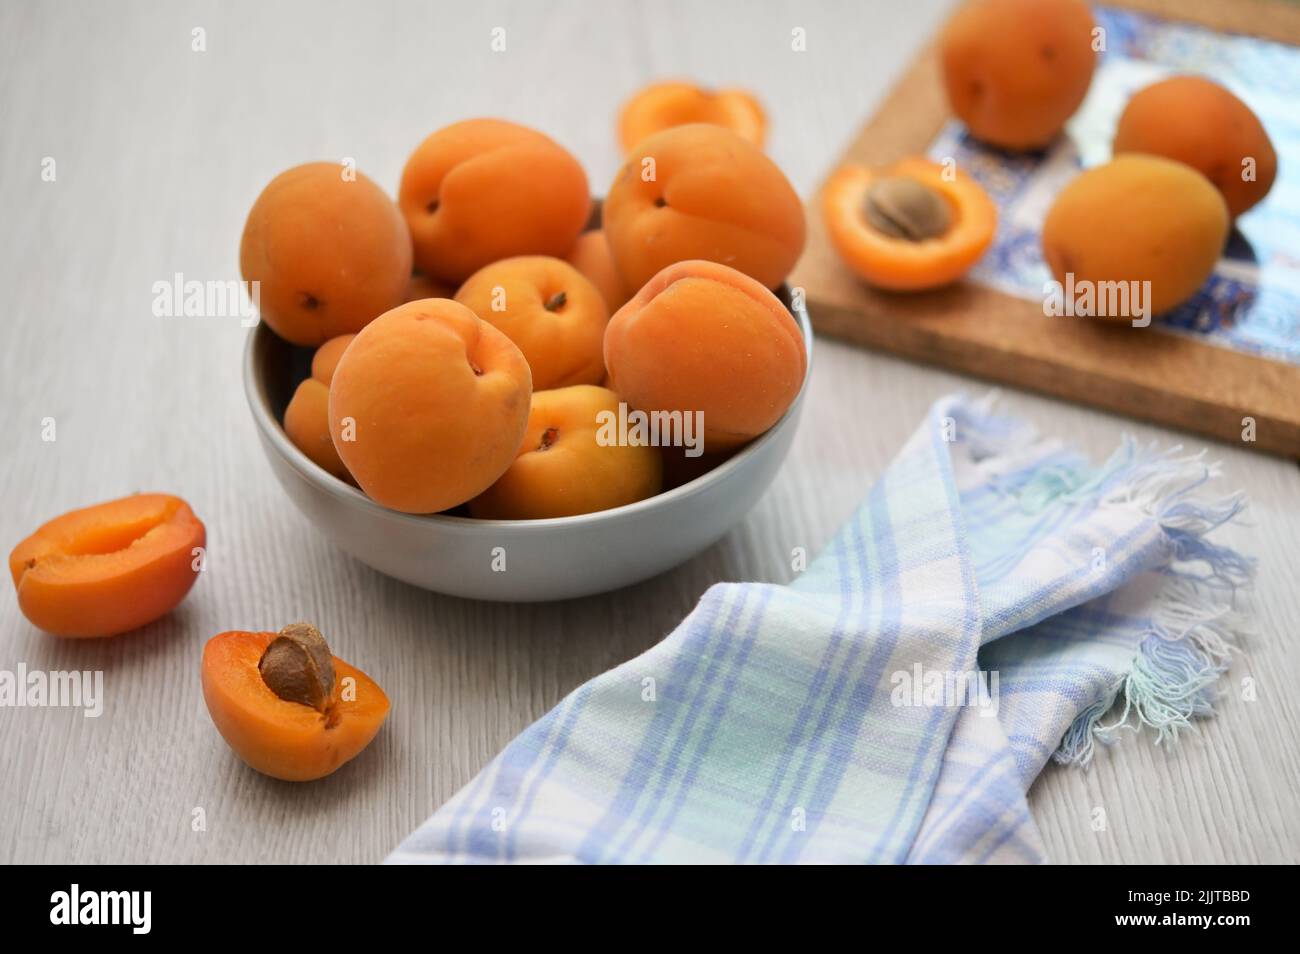 Closeup Delicious Fresh Ripe Apricots On Wooden Table Stock Photo